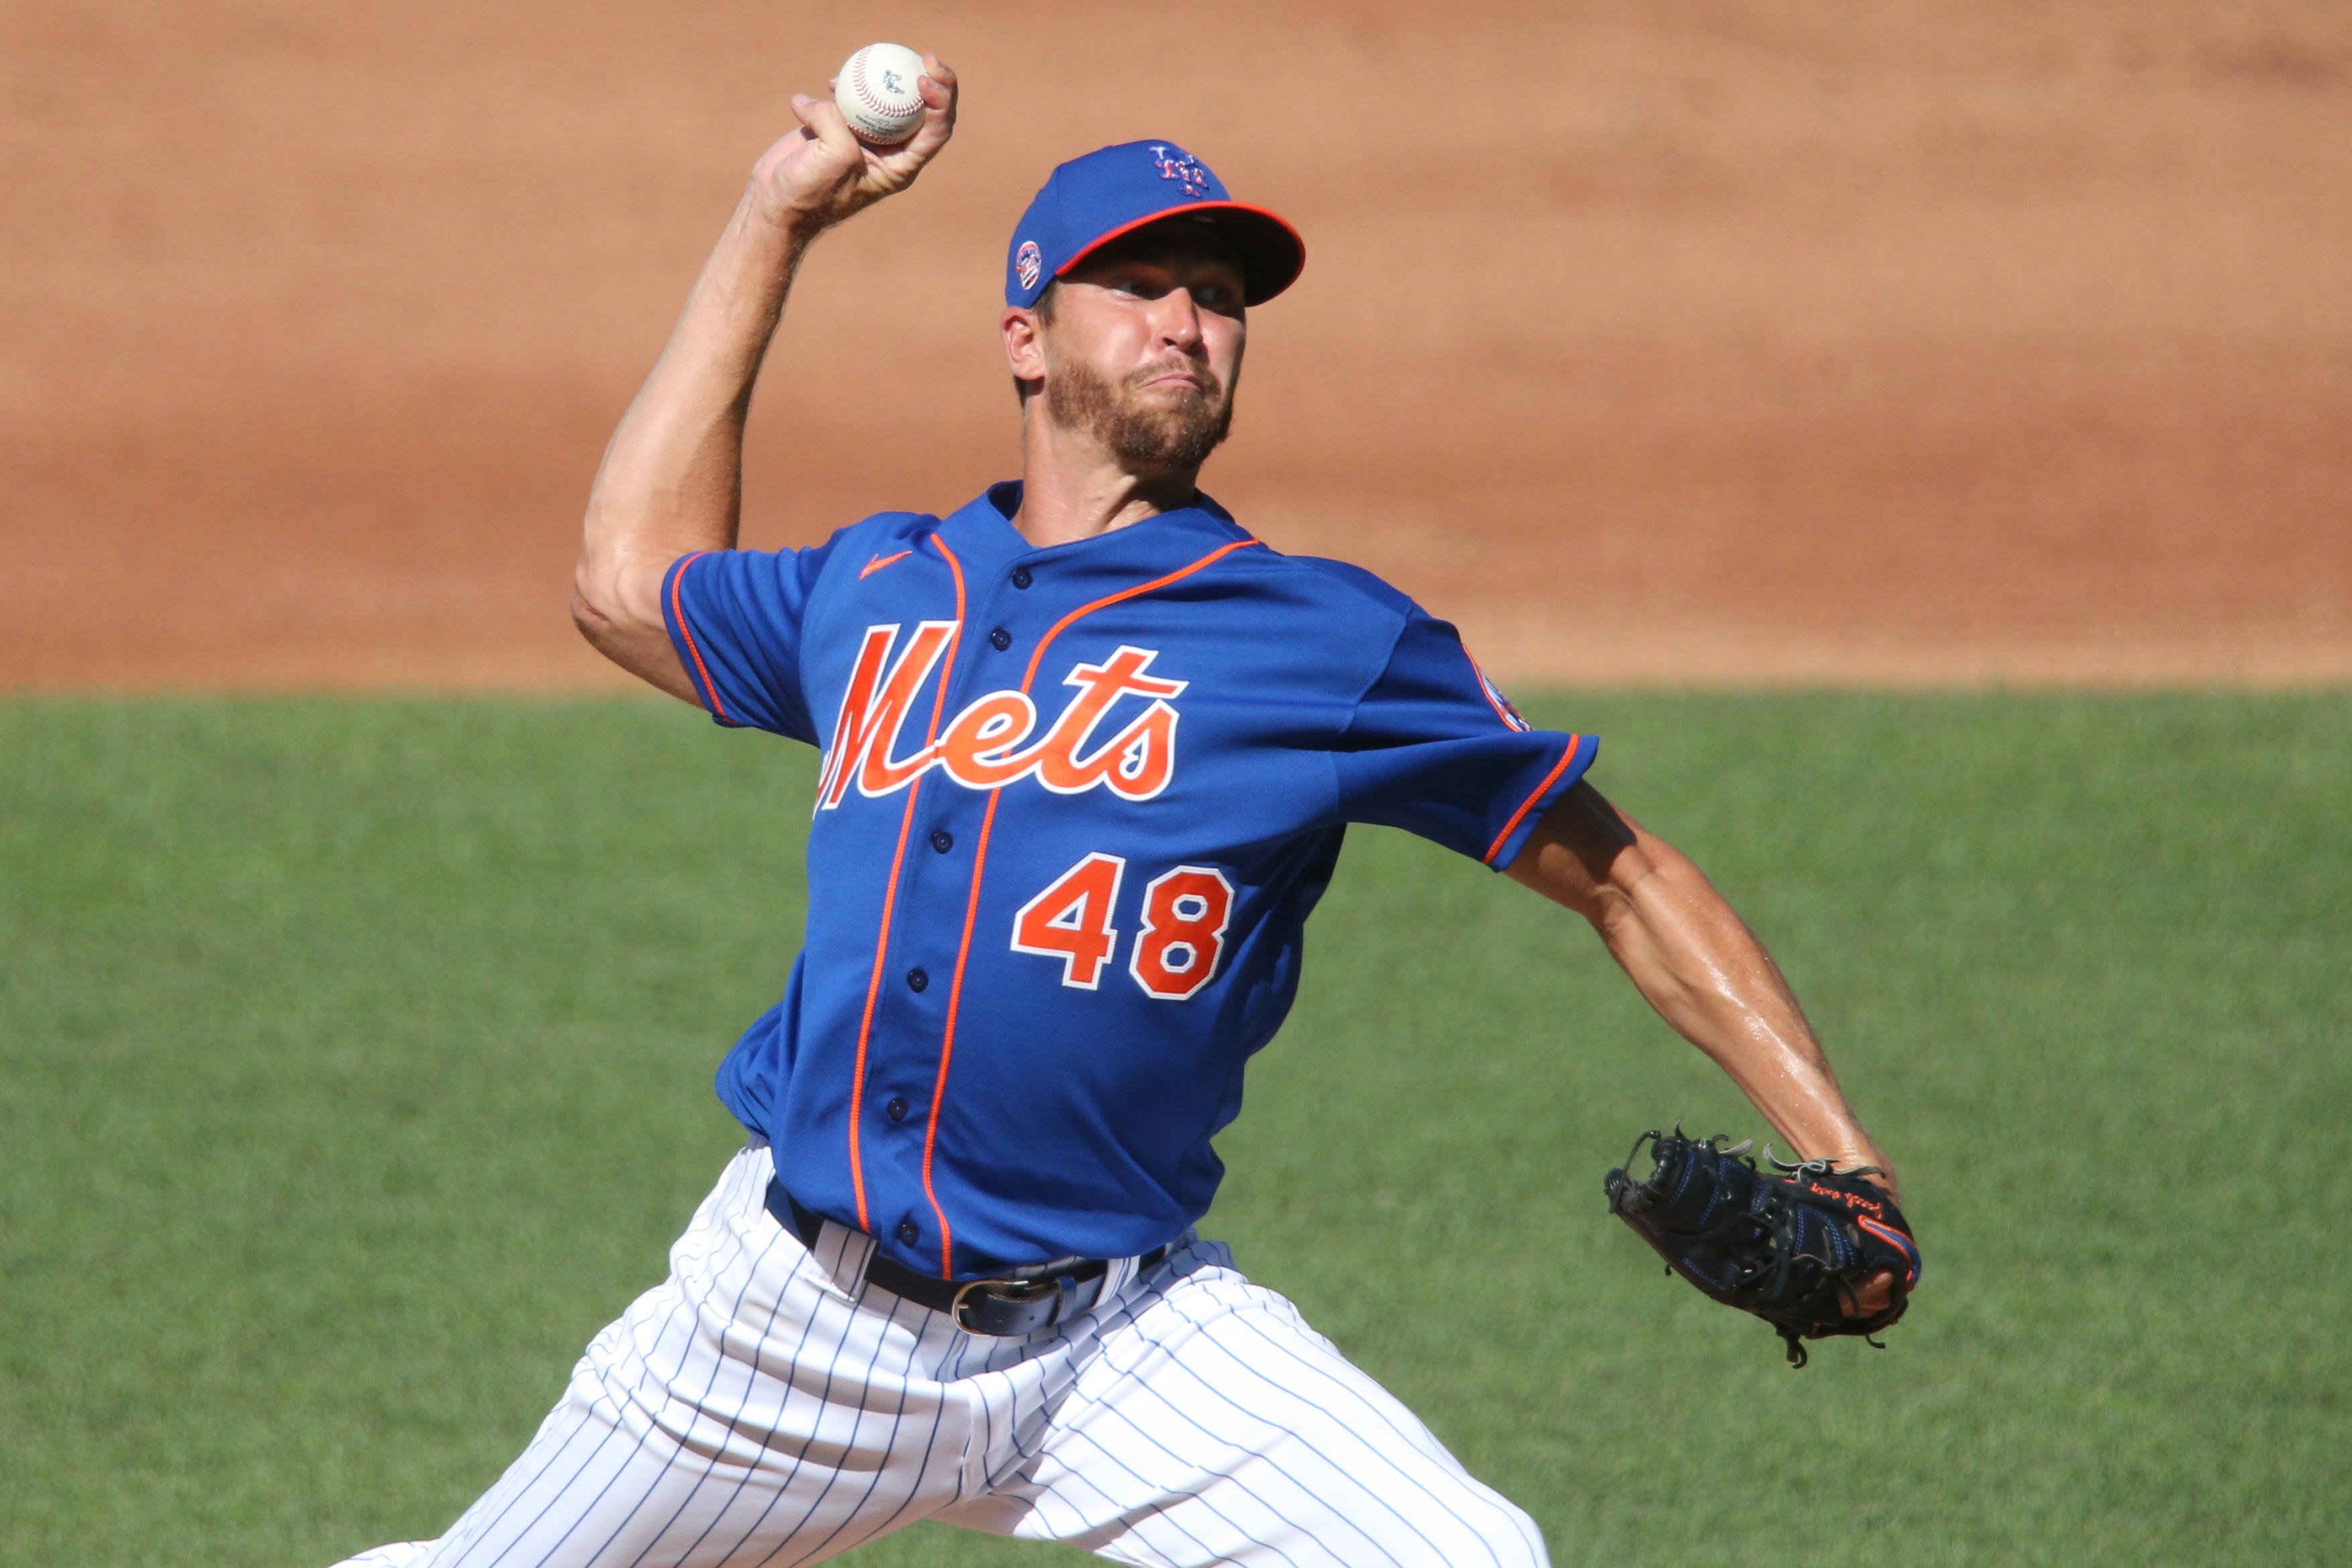 Jacob deGrom pitches during the Mets' sim game. Credit: Brad Penner/USA TODAY Sports / Brad Penner/USA TODAY Sports